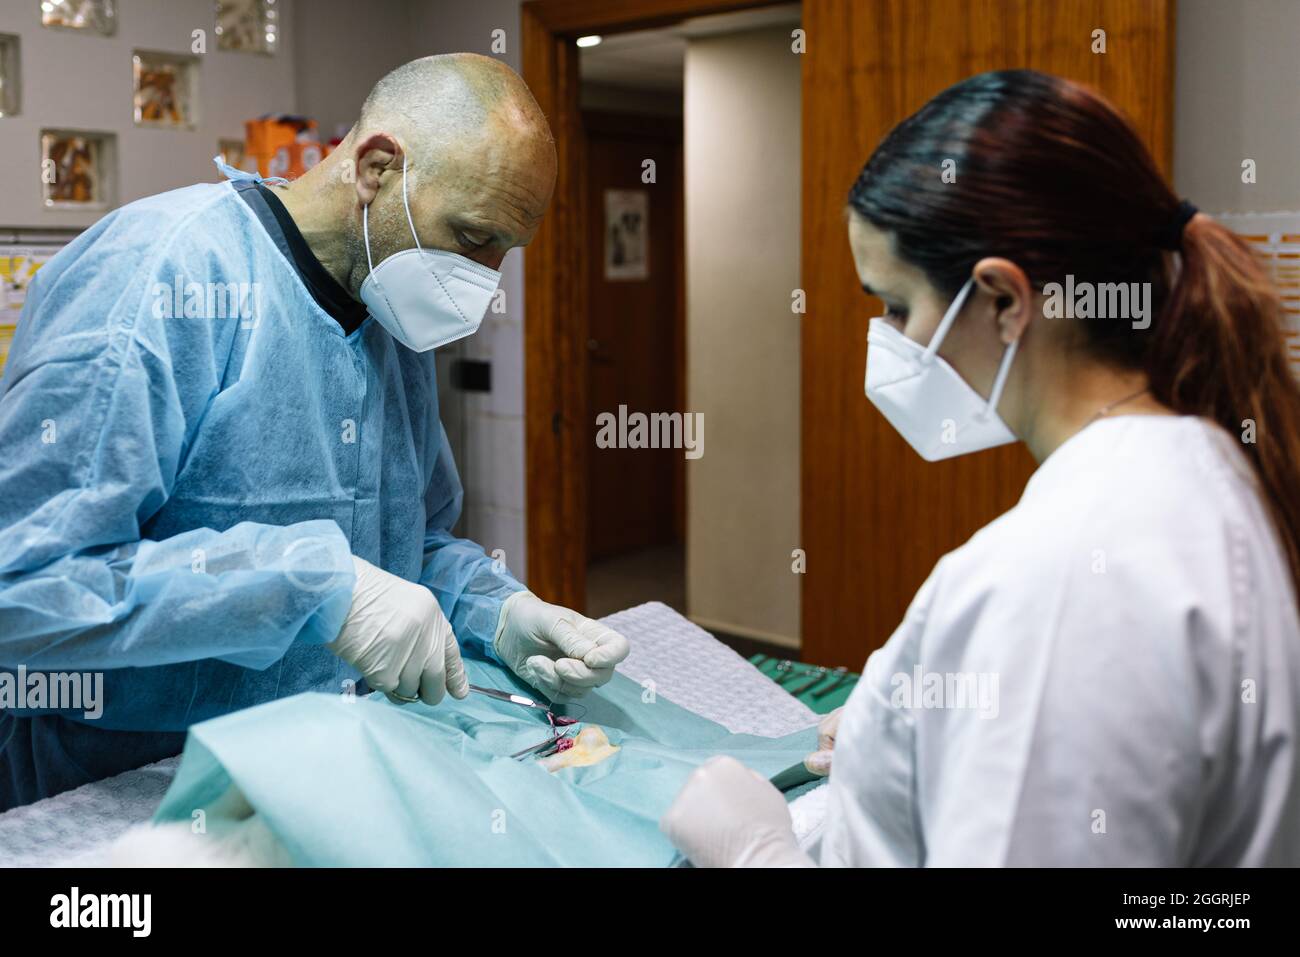 Veterinary surgeons performing a surgery on a pet in an operating room. Stock Photo